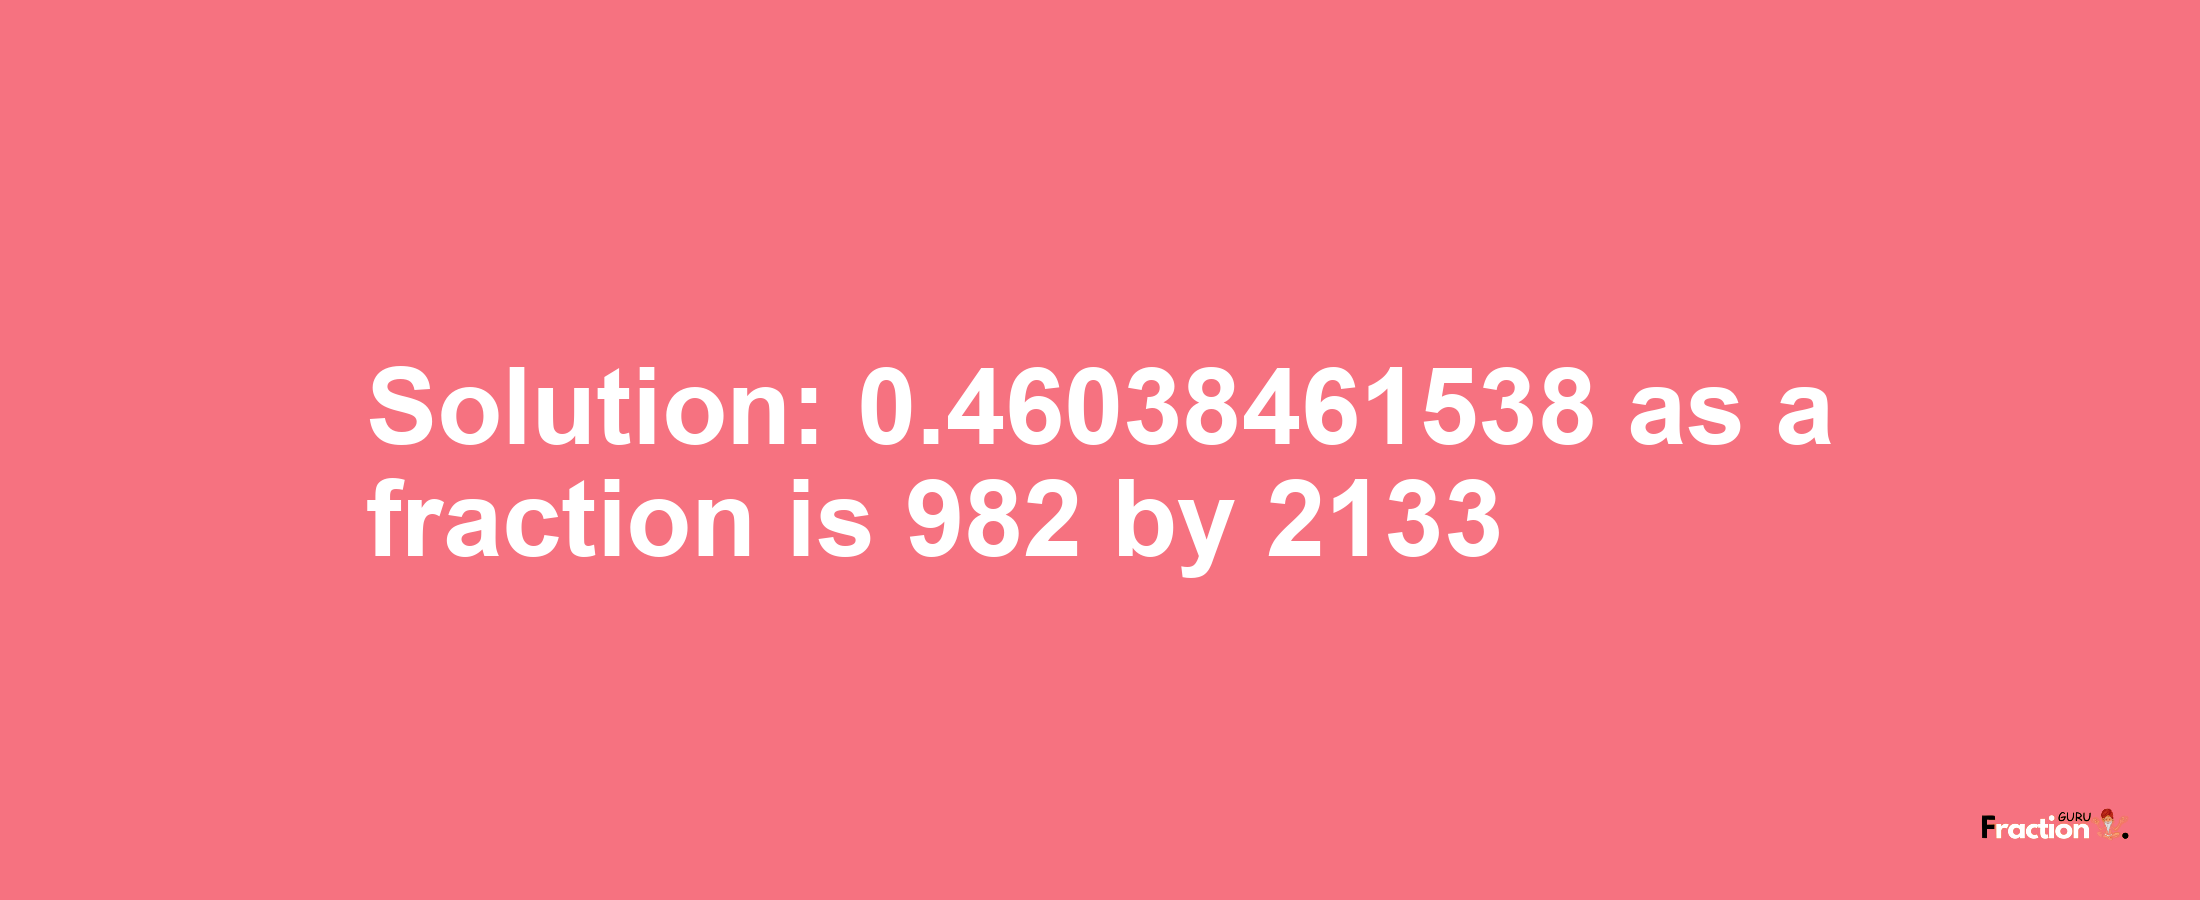 Solution:0.46038461538 as a fraction is 982/2133